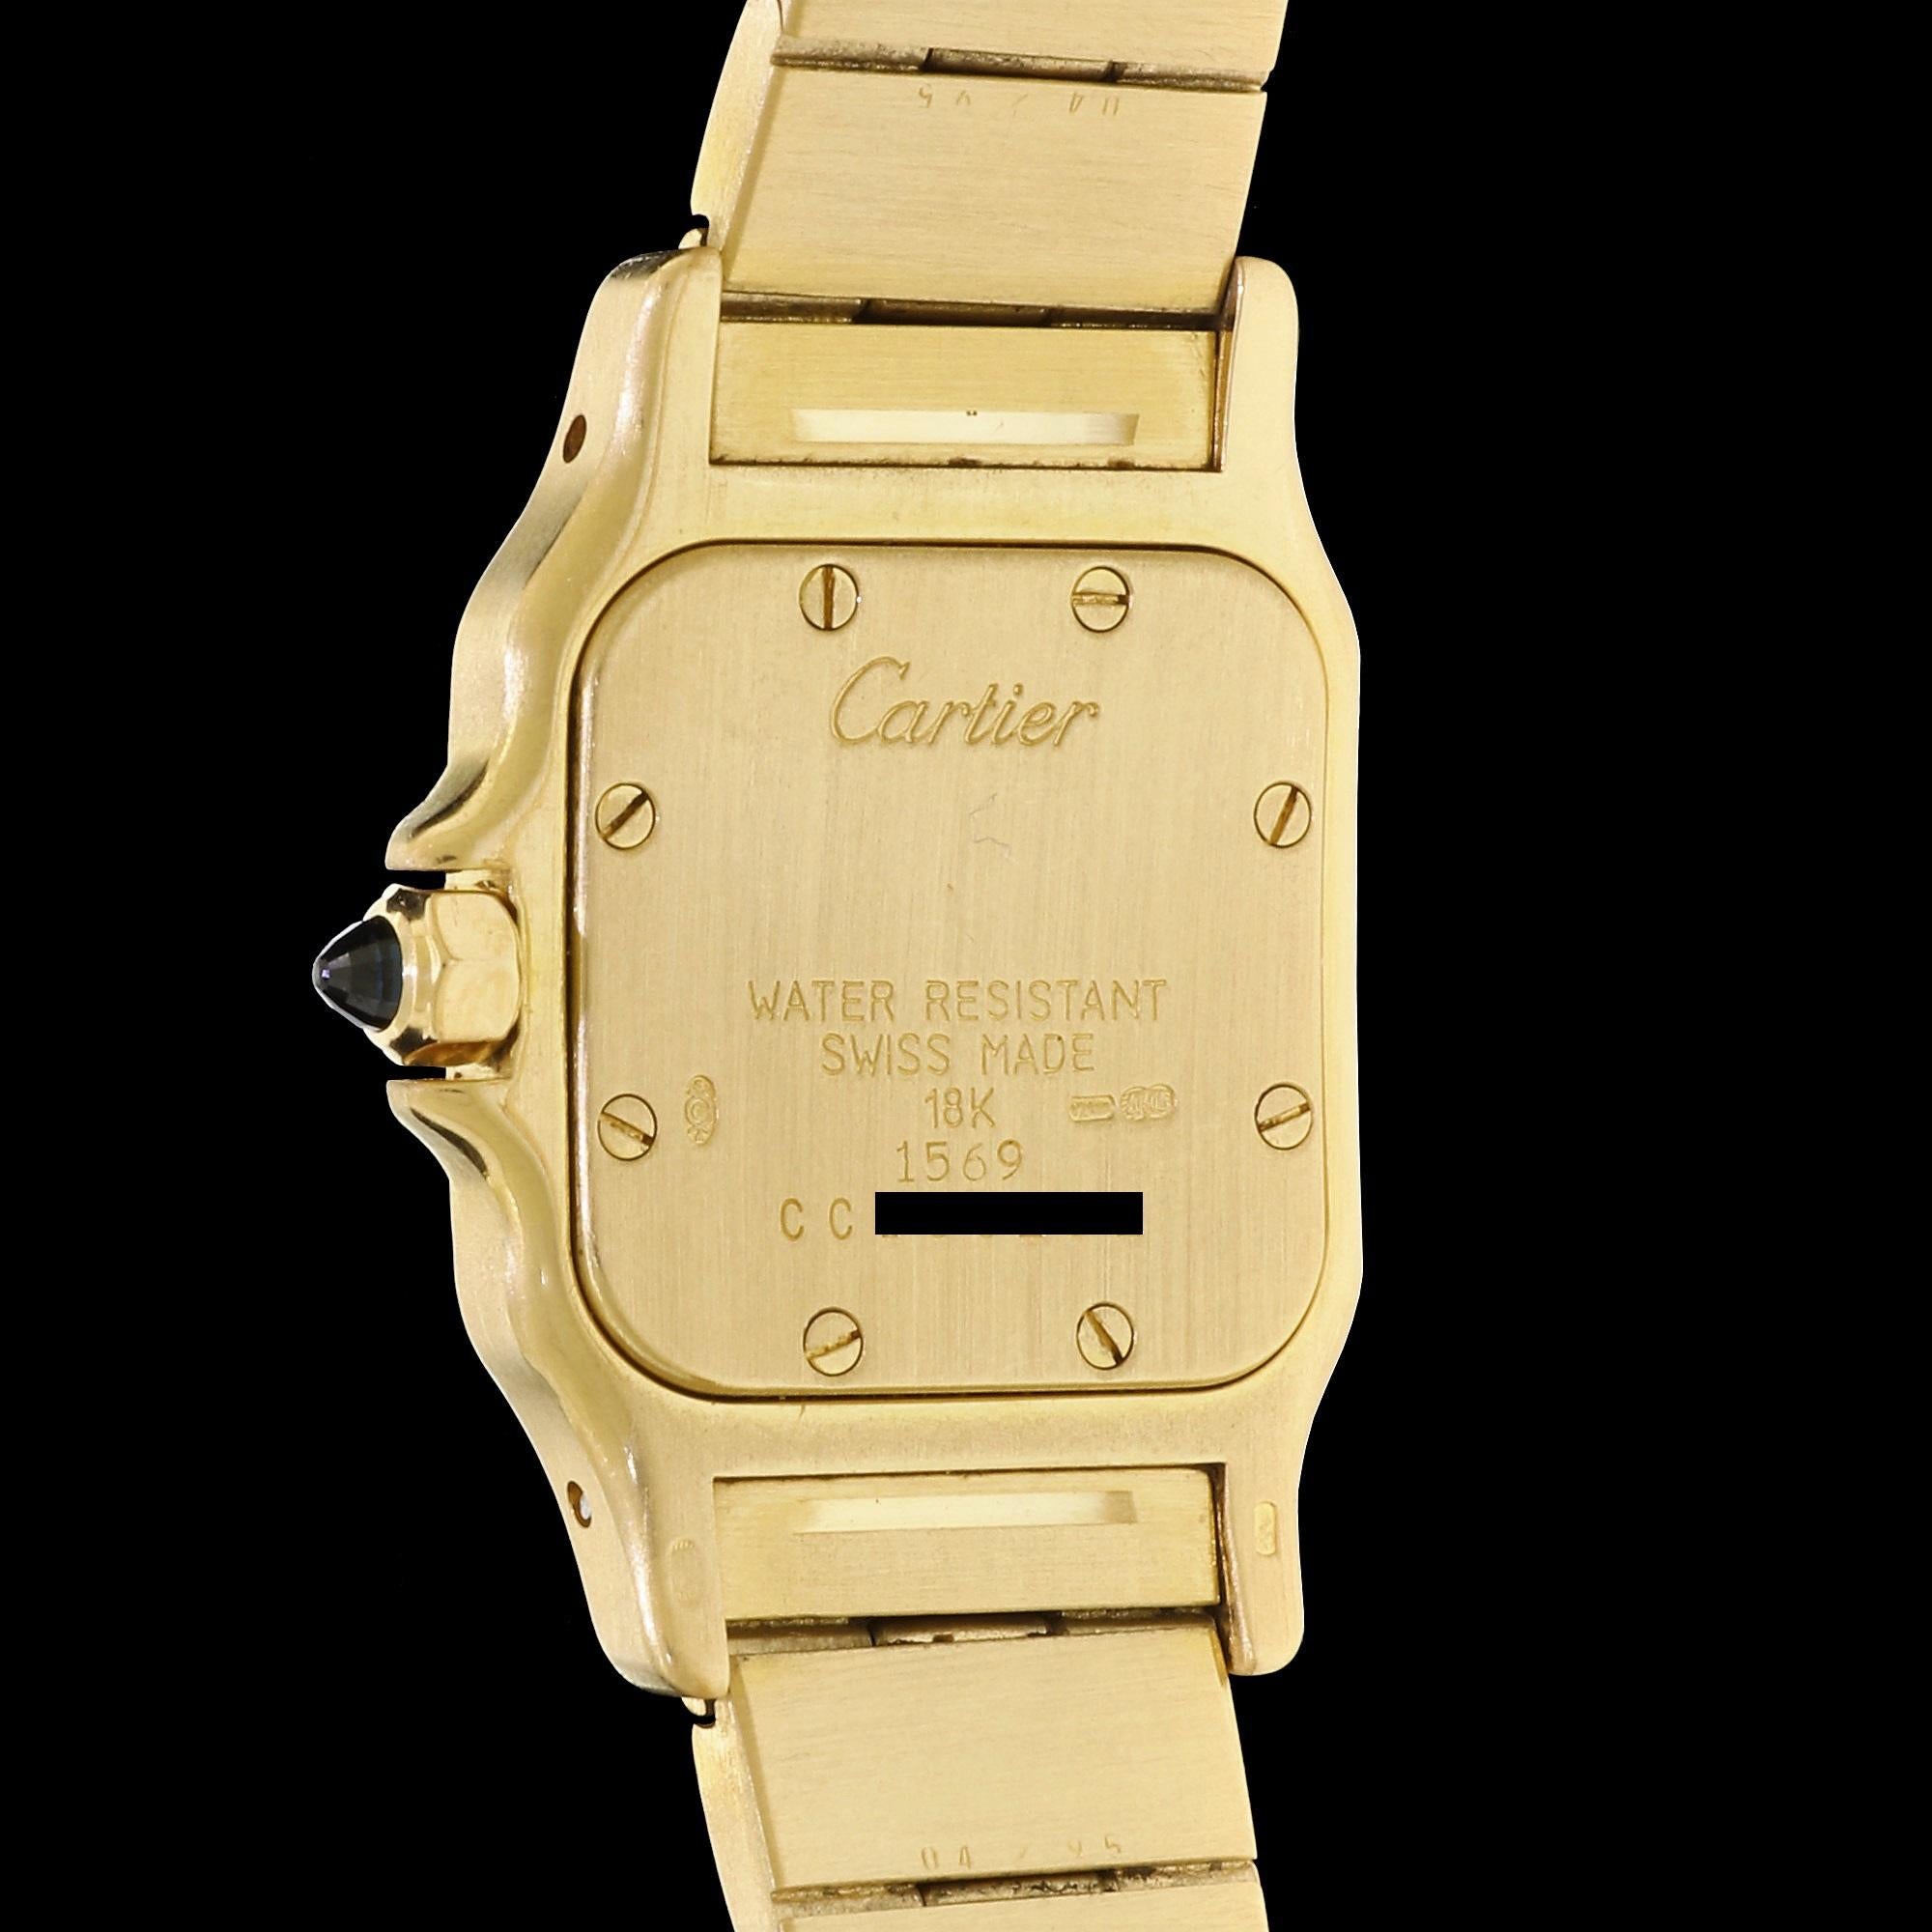 Ladies Cartier Santos 18K 750 Solid Gold Watch W Papers and Box 1569 One Owner 2